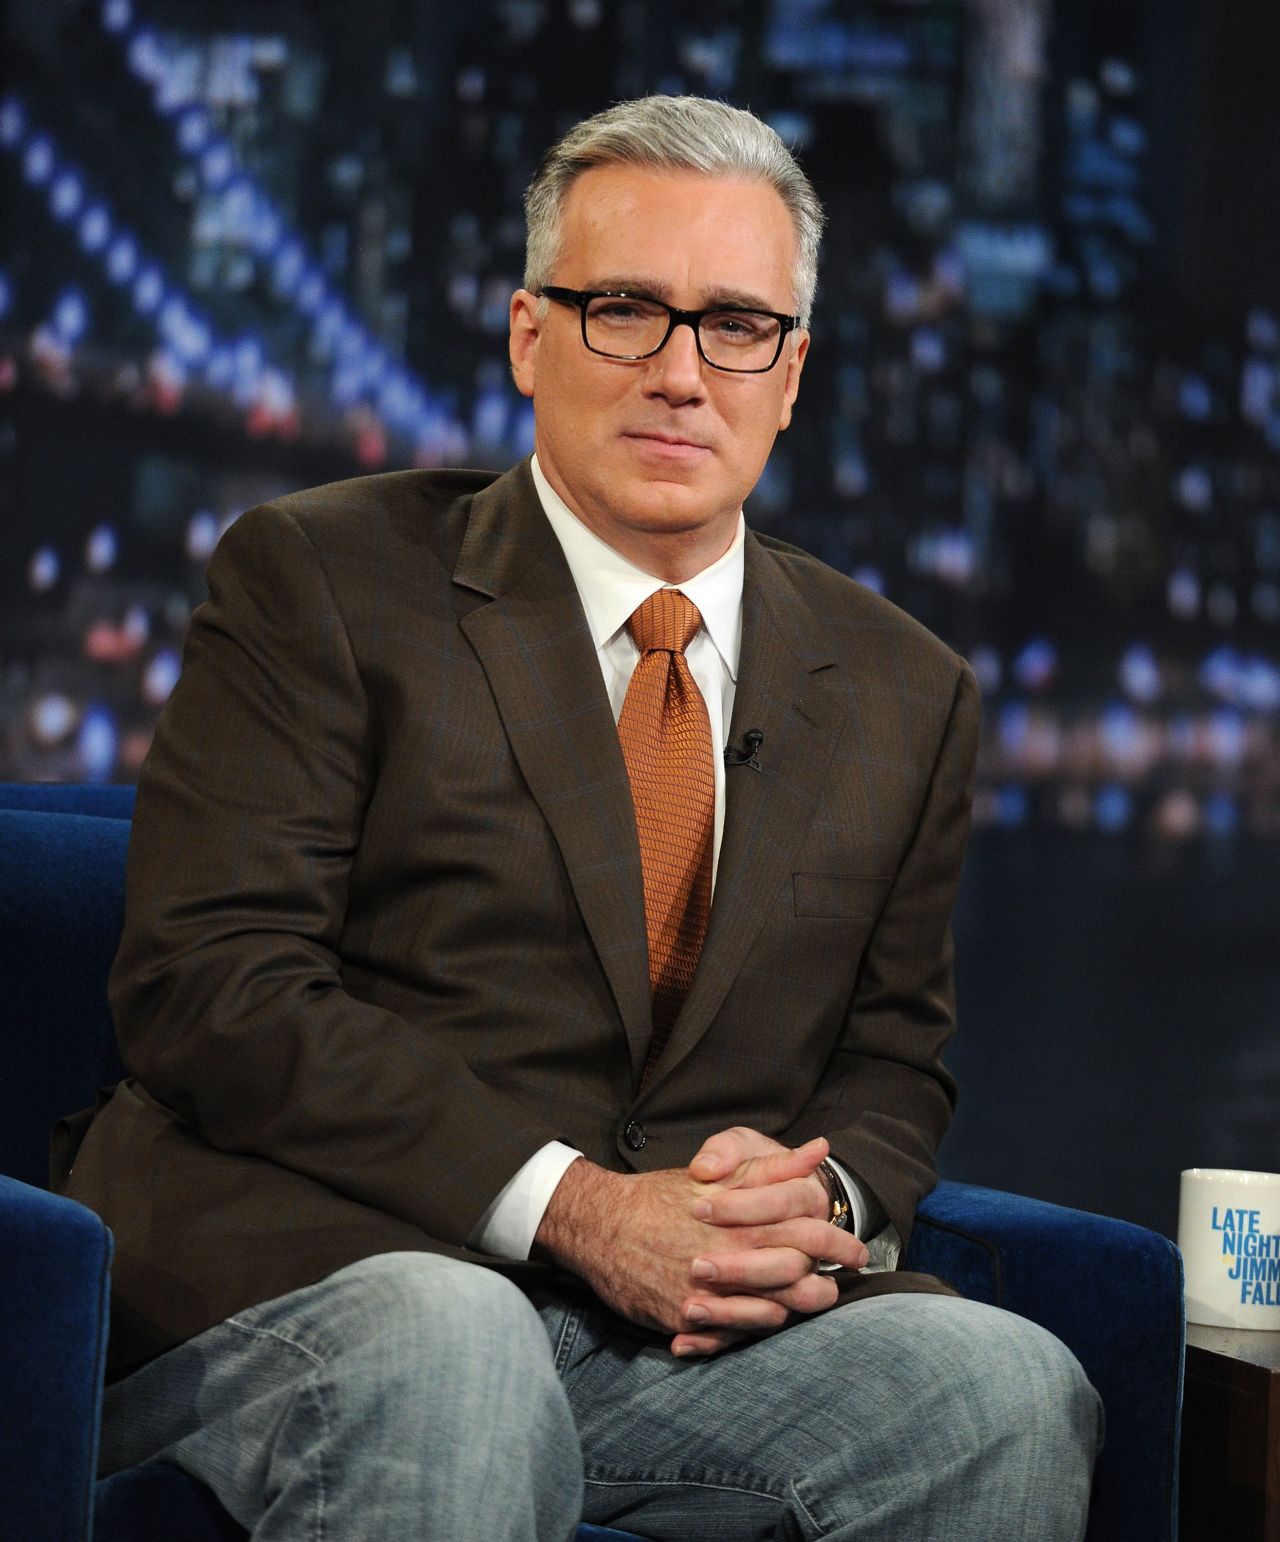 Keith Olbermann hosted "Countdown" on both MSNBC and Current TV.